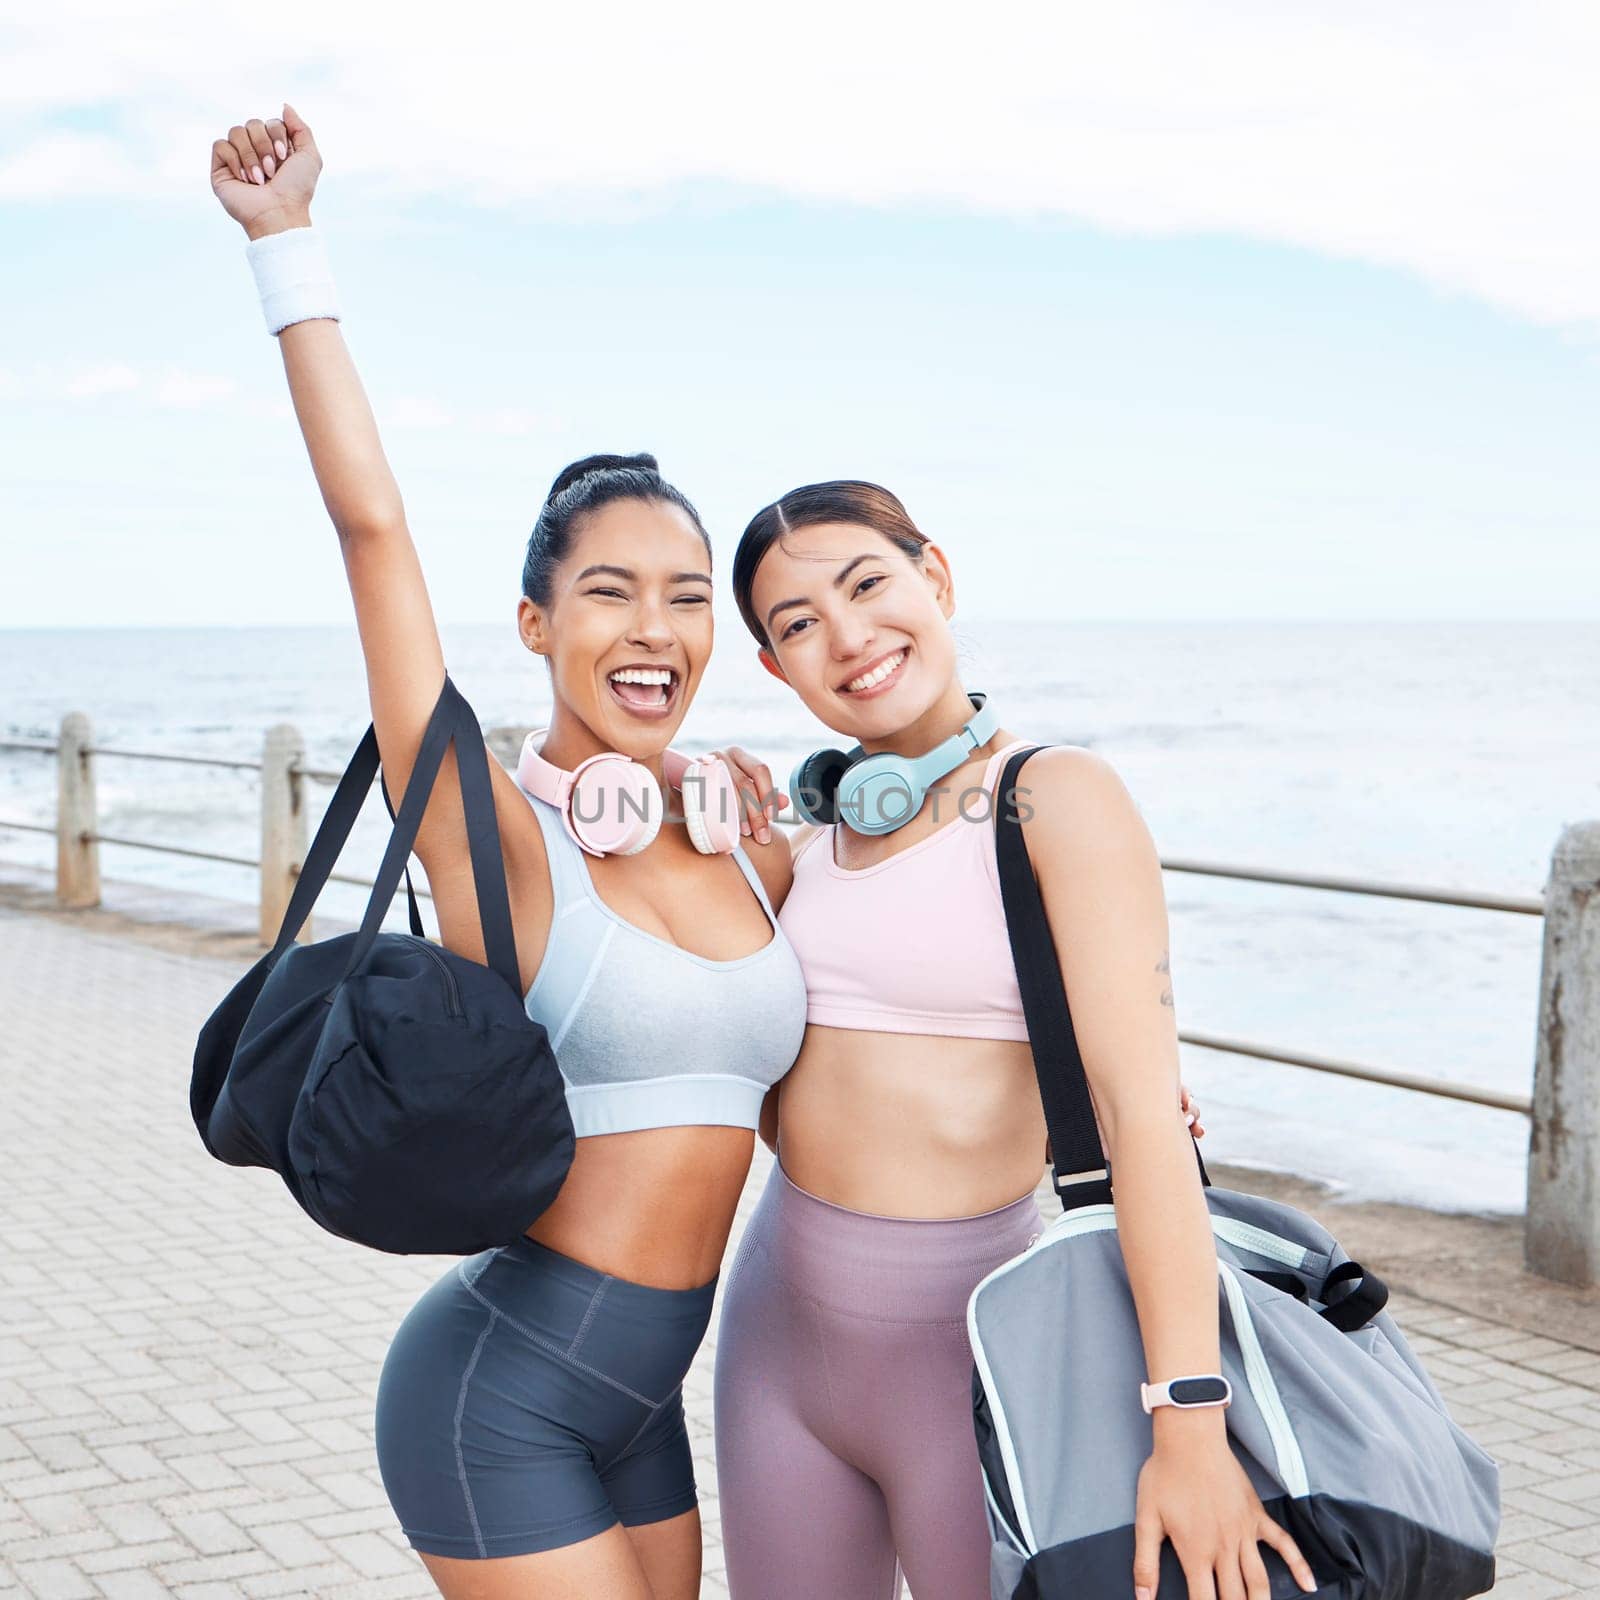 Excited, fitness success and friends exercise by ocean for outdoor training wellness, accountability and happy with body results. Happy sports women with workout bag and headphones for motivation.